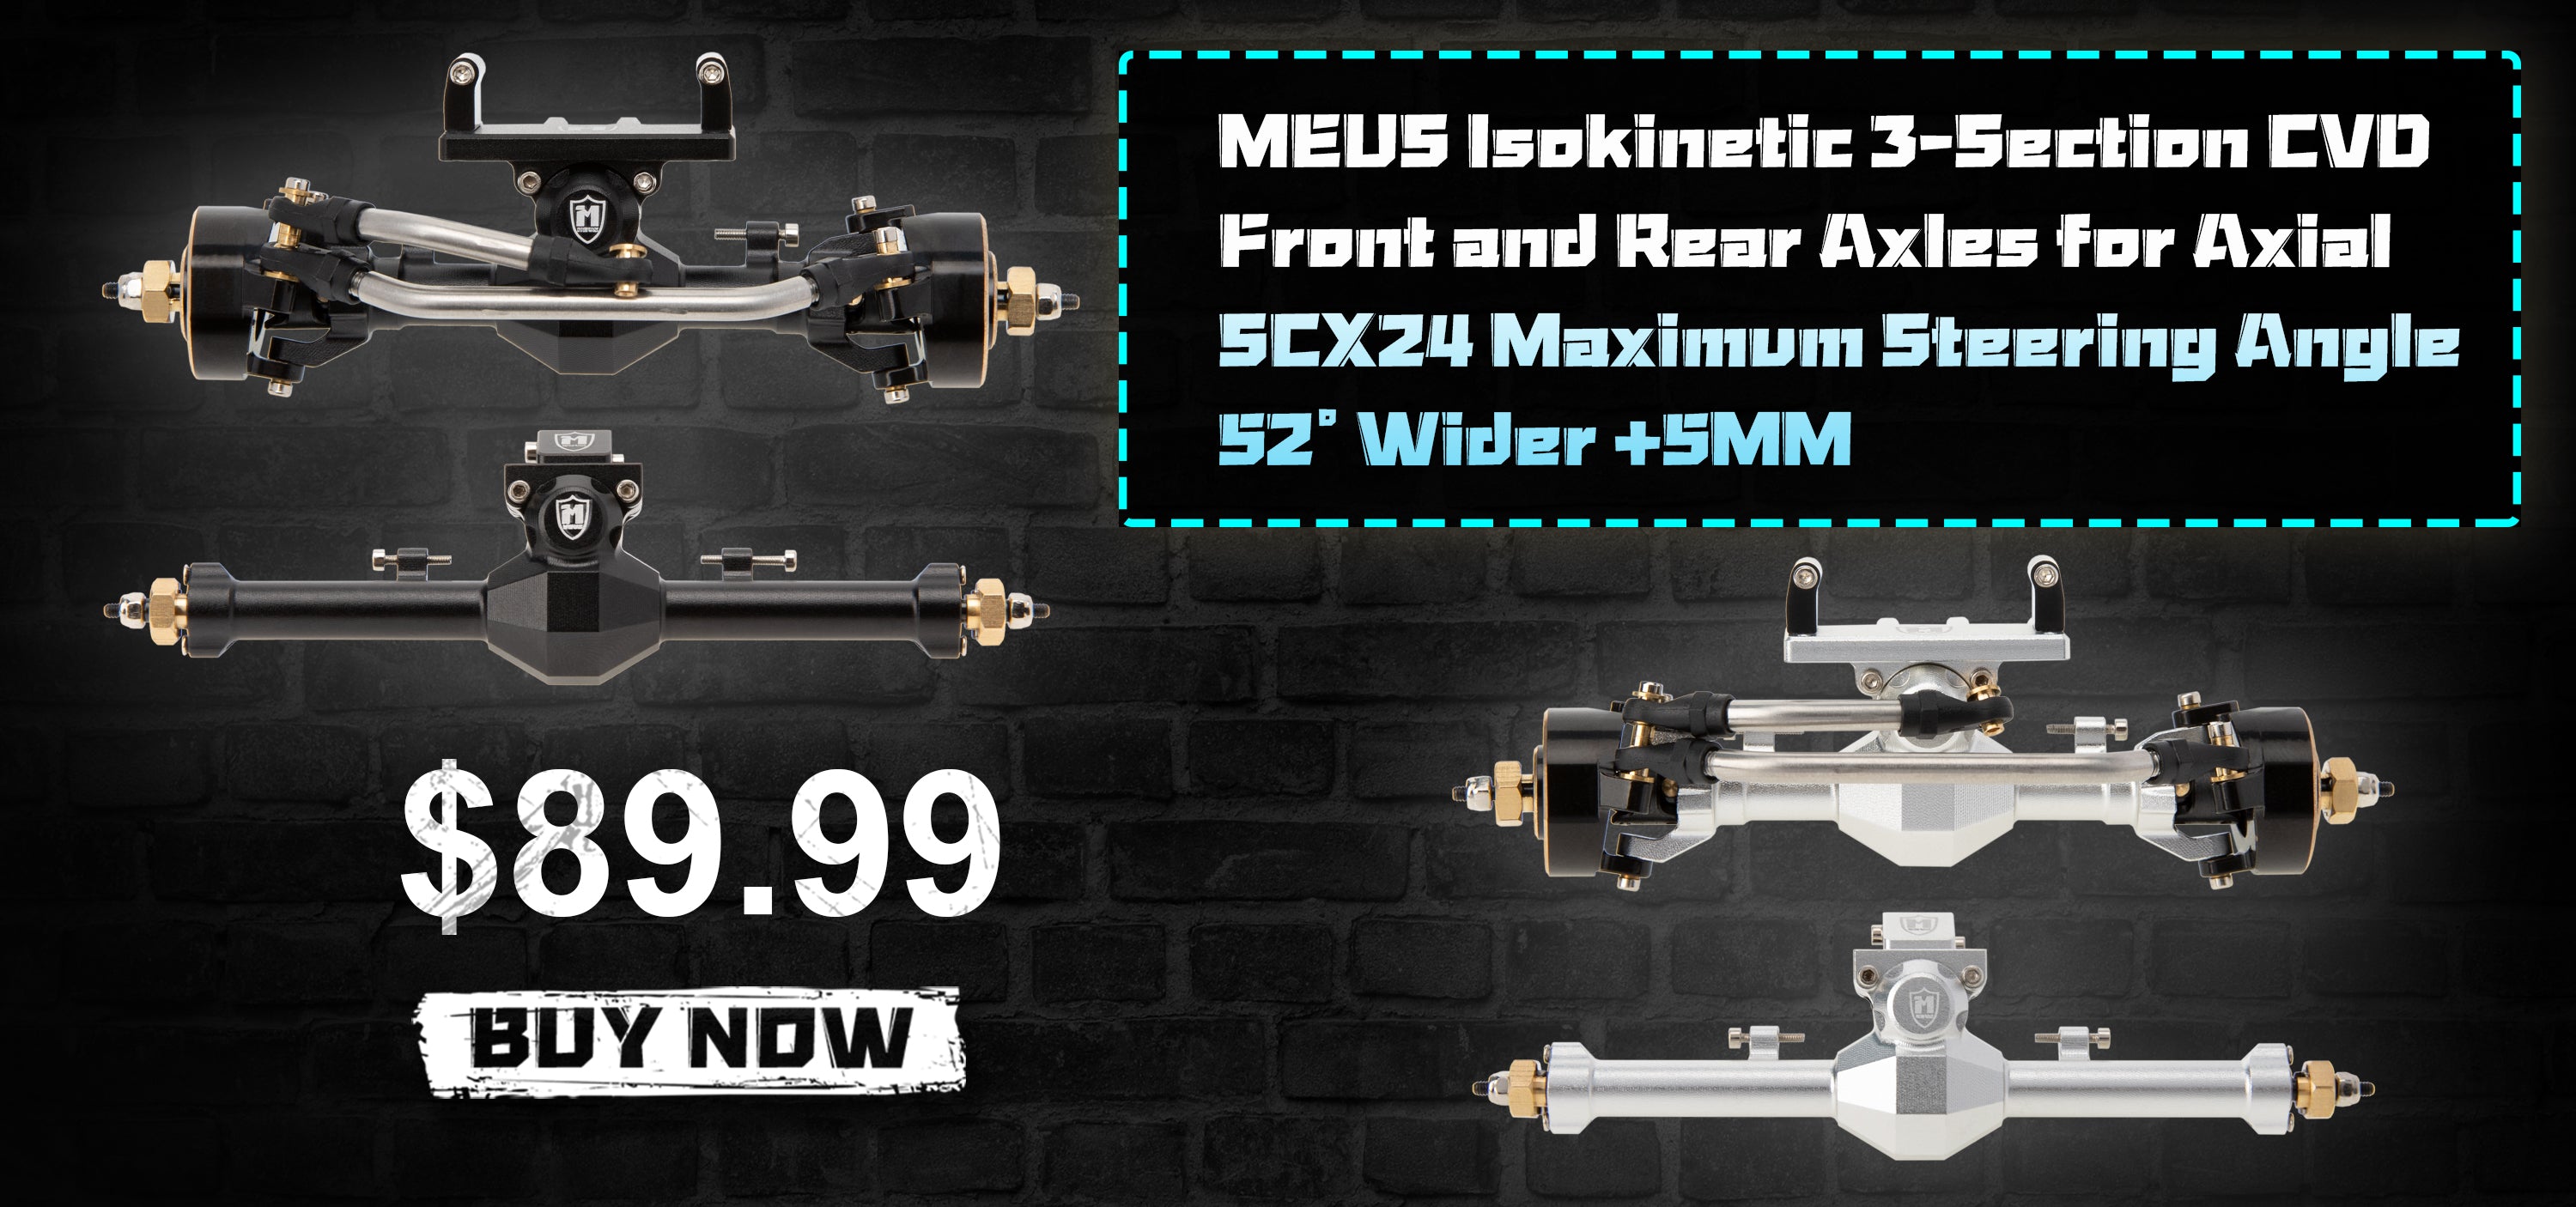 MEUS Racing Isokinetic 3-section CVD front and Rear Axle for SCX24